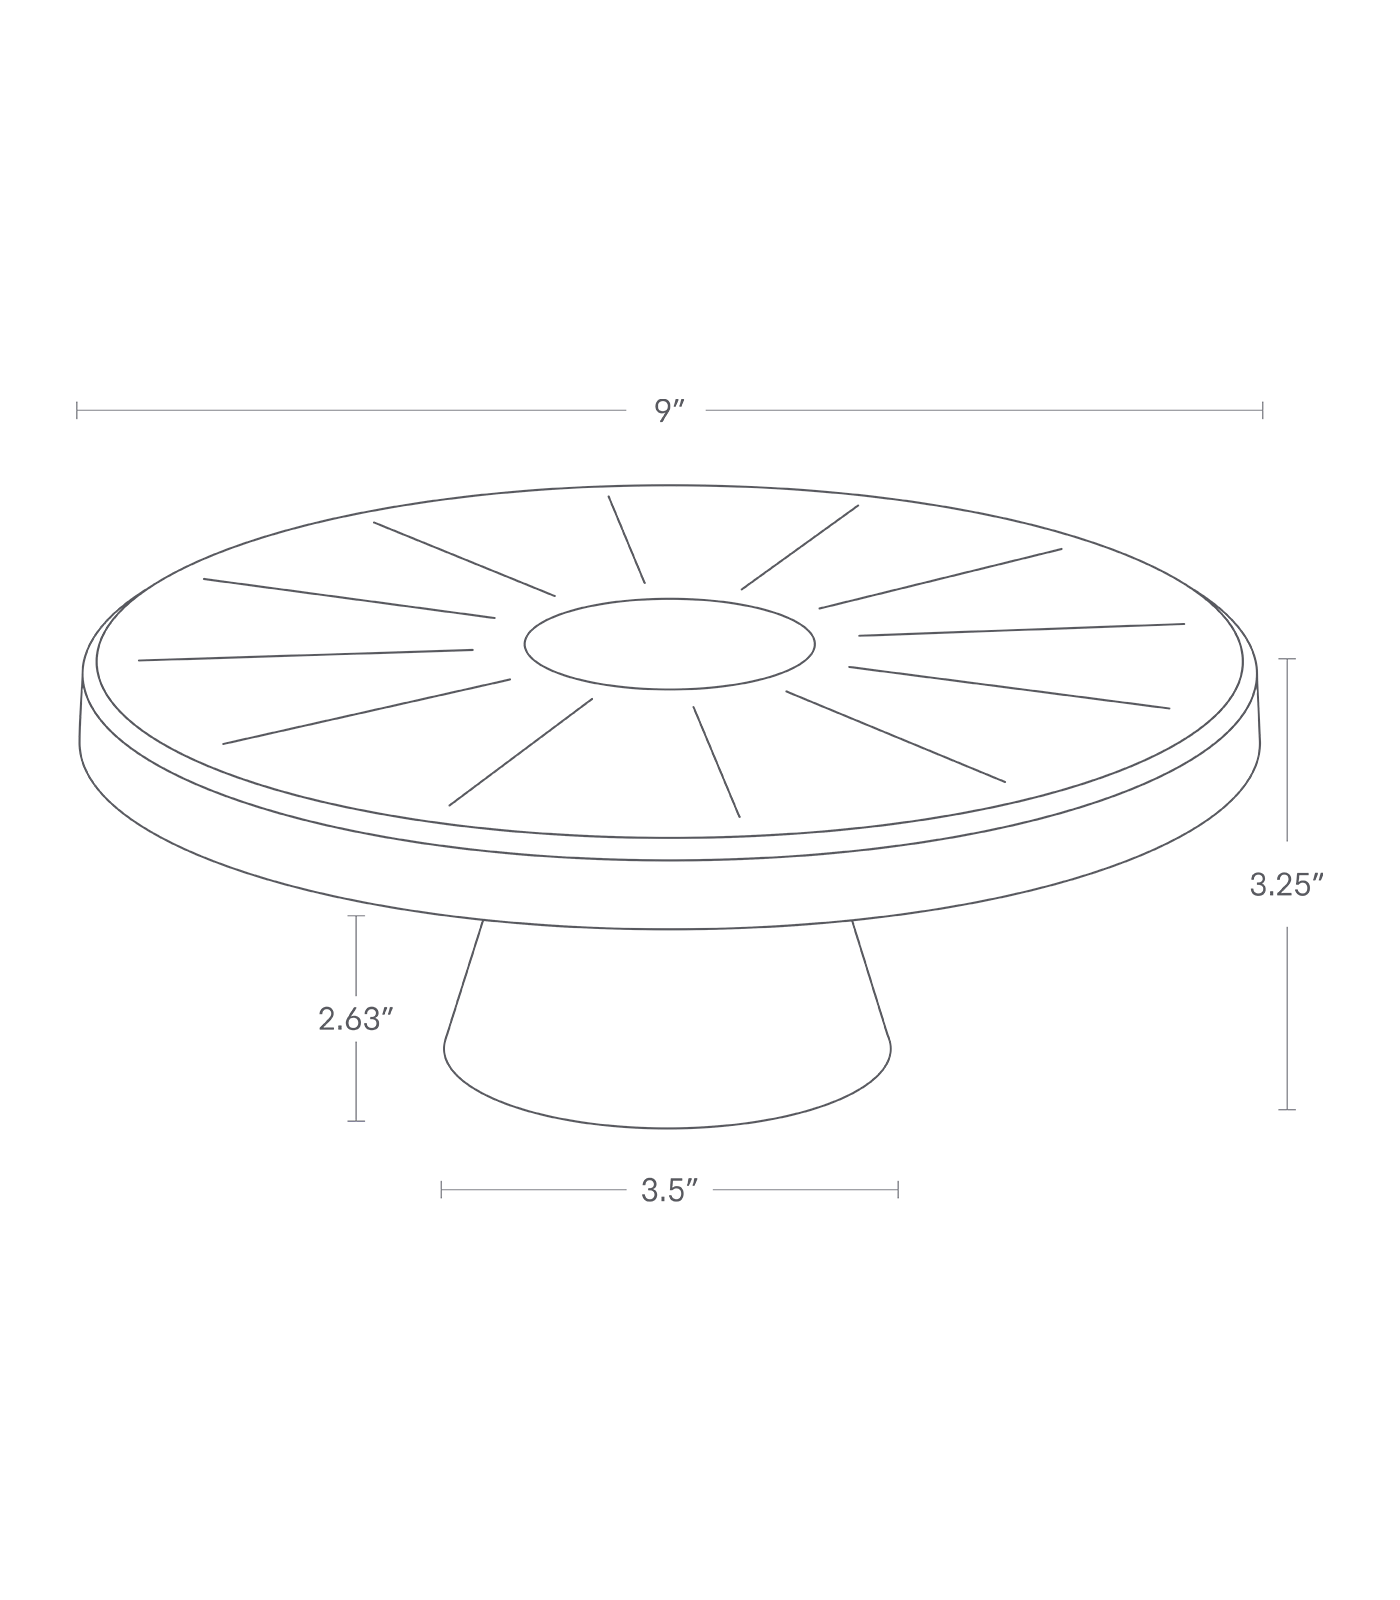 Dimension image for Stackable Cake Stand on a white background including dimensions  L 9.06 x W 9.06 x H 3.54 inches